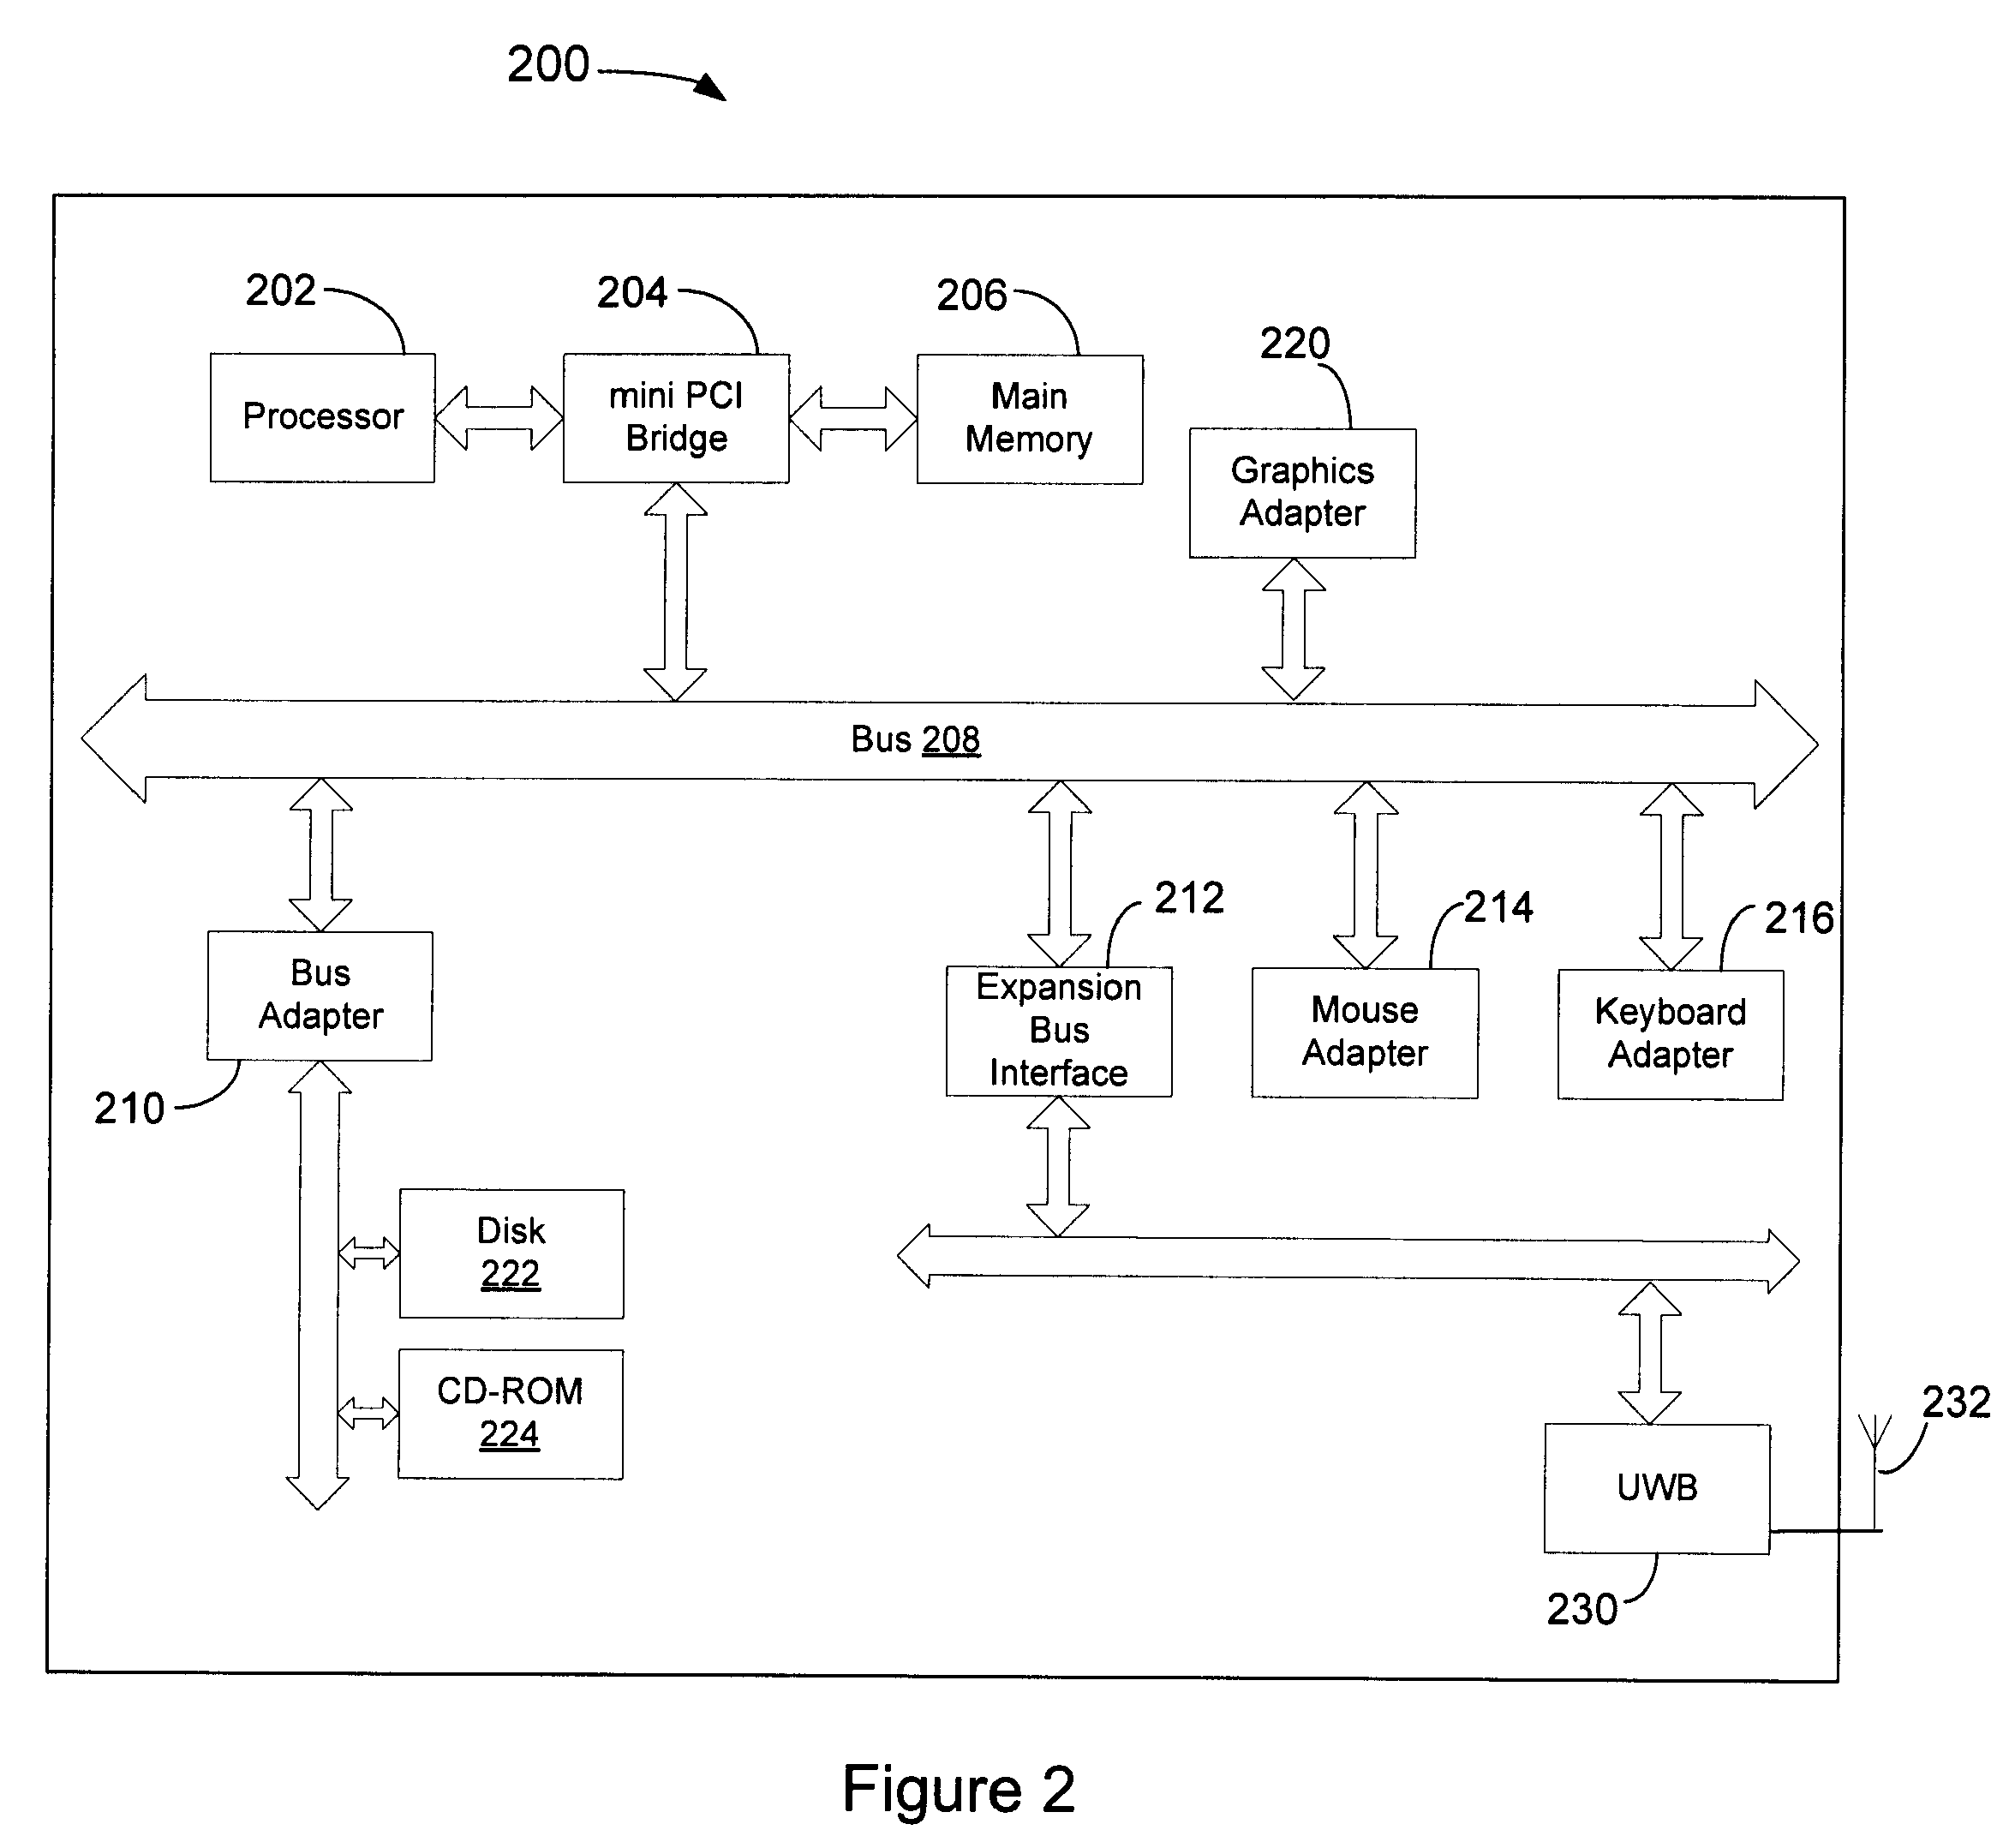 System, Method and Computer-Readable Medium for Detection and Avoidance of Victim Services in Ultra-Wideband Systems